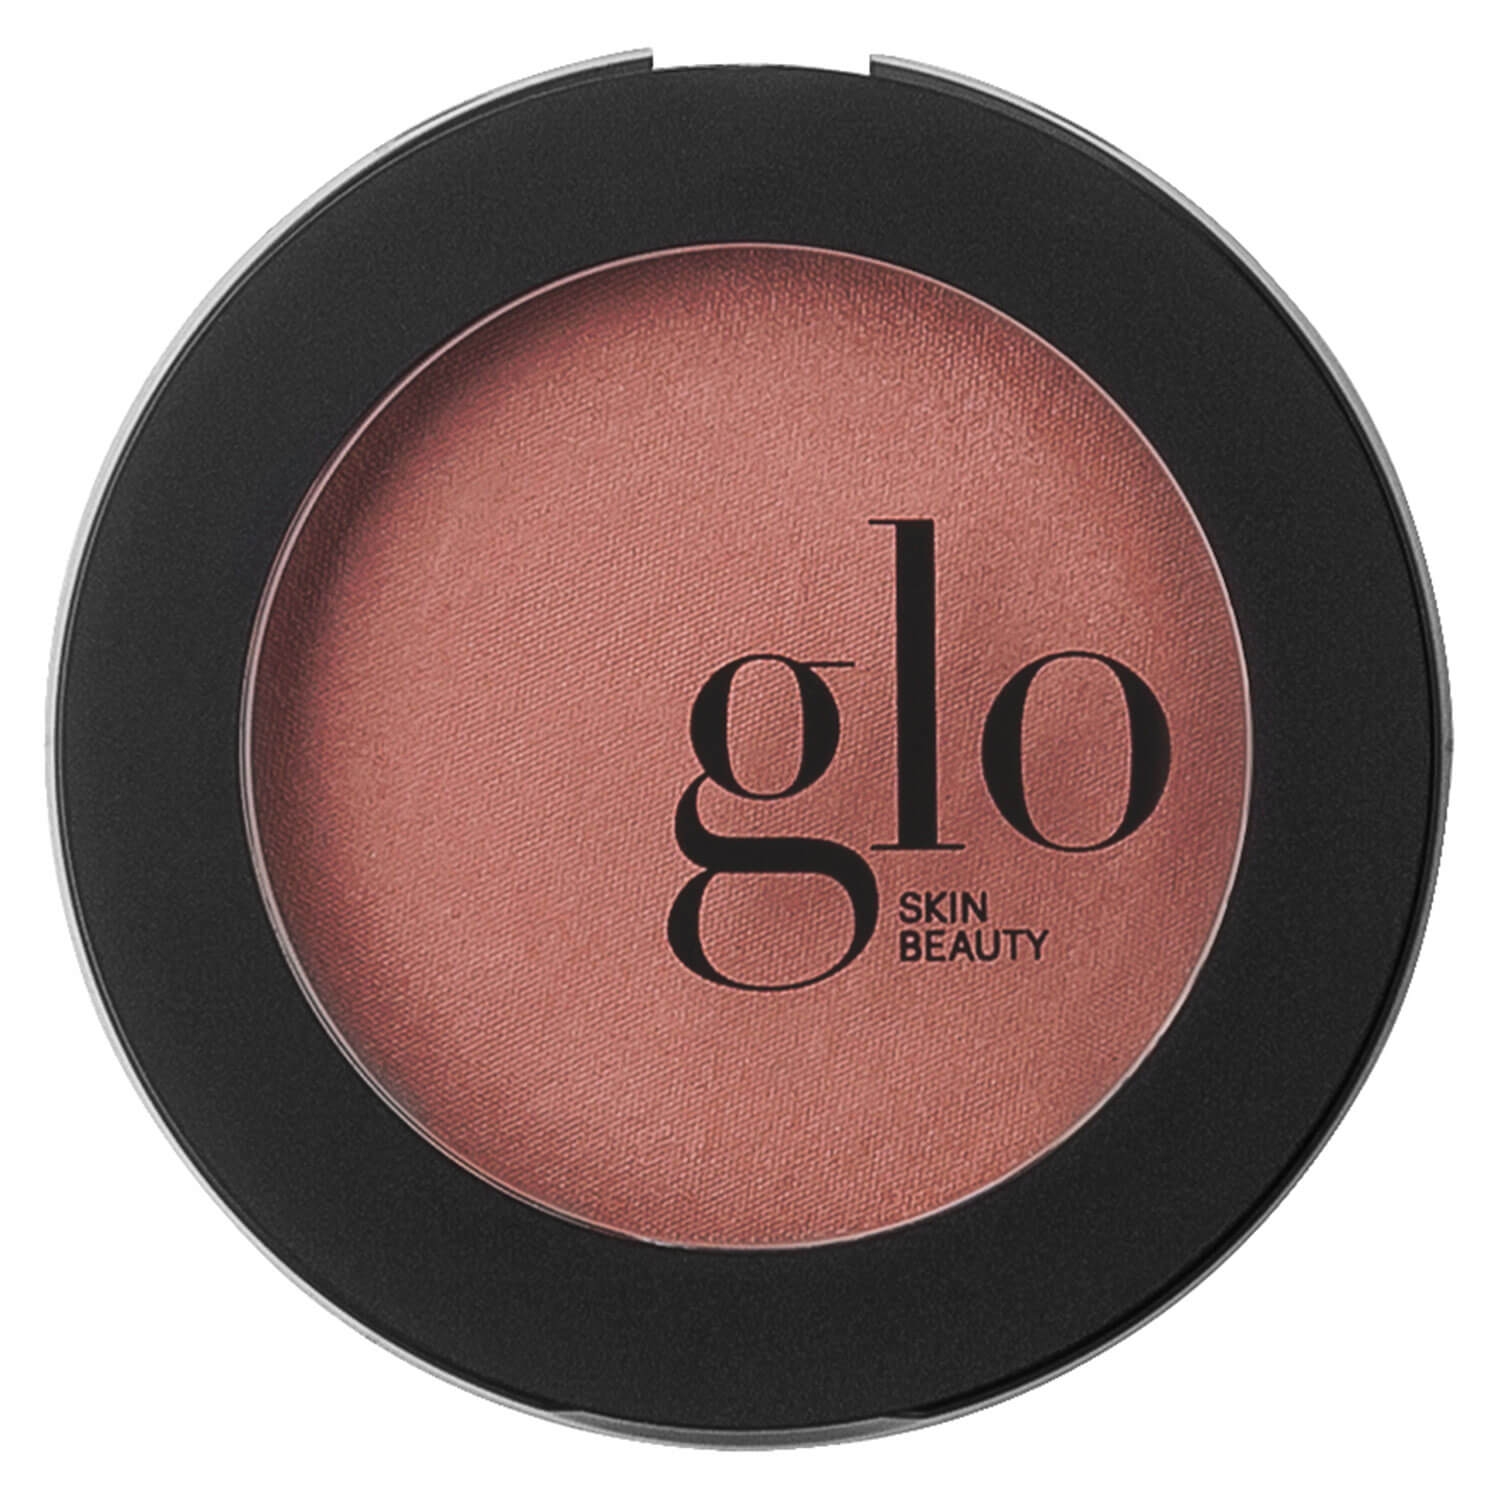 Product image from Glo Skin Beauty Blush - Blush Spice Berry